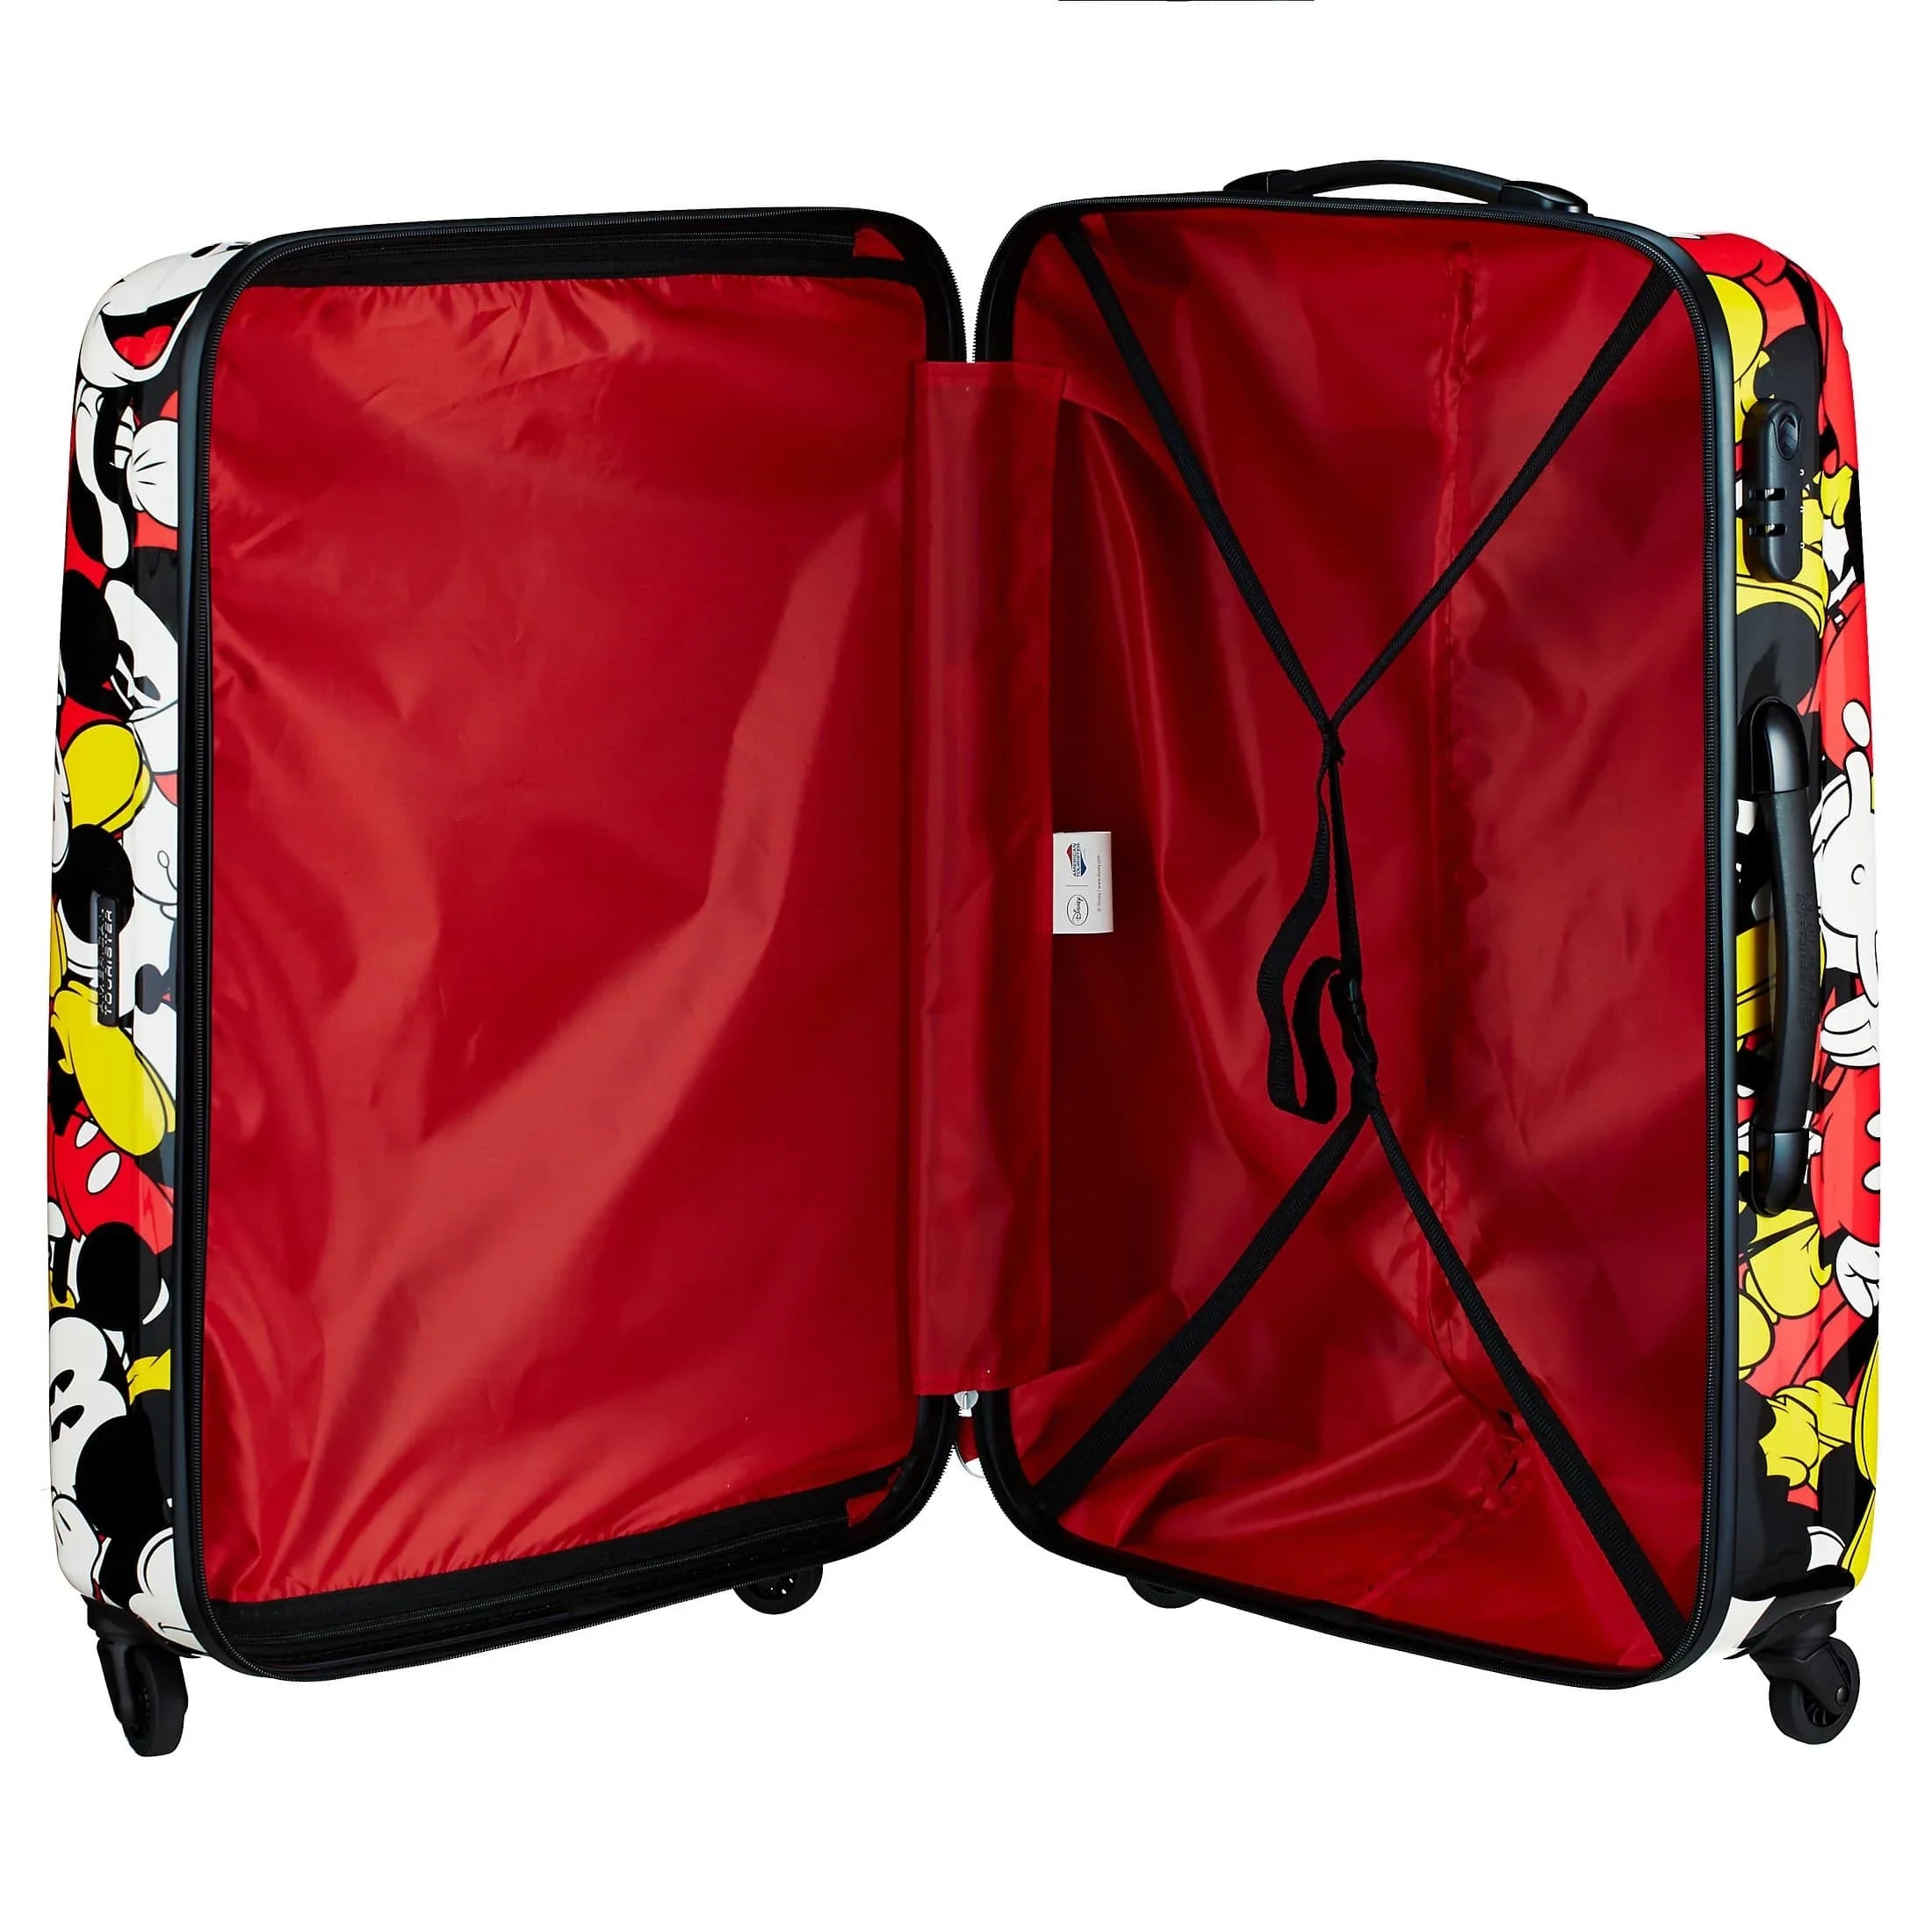 American Tourister Disney Legends trolley 4 roues 74 cm - Mickey Mouse à pois